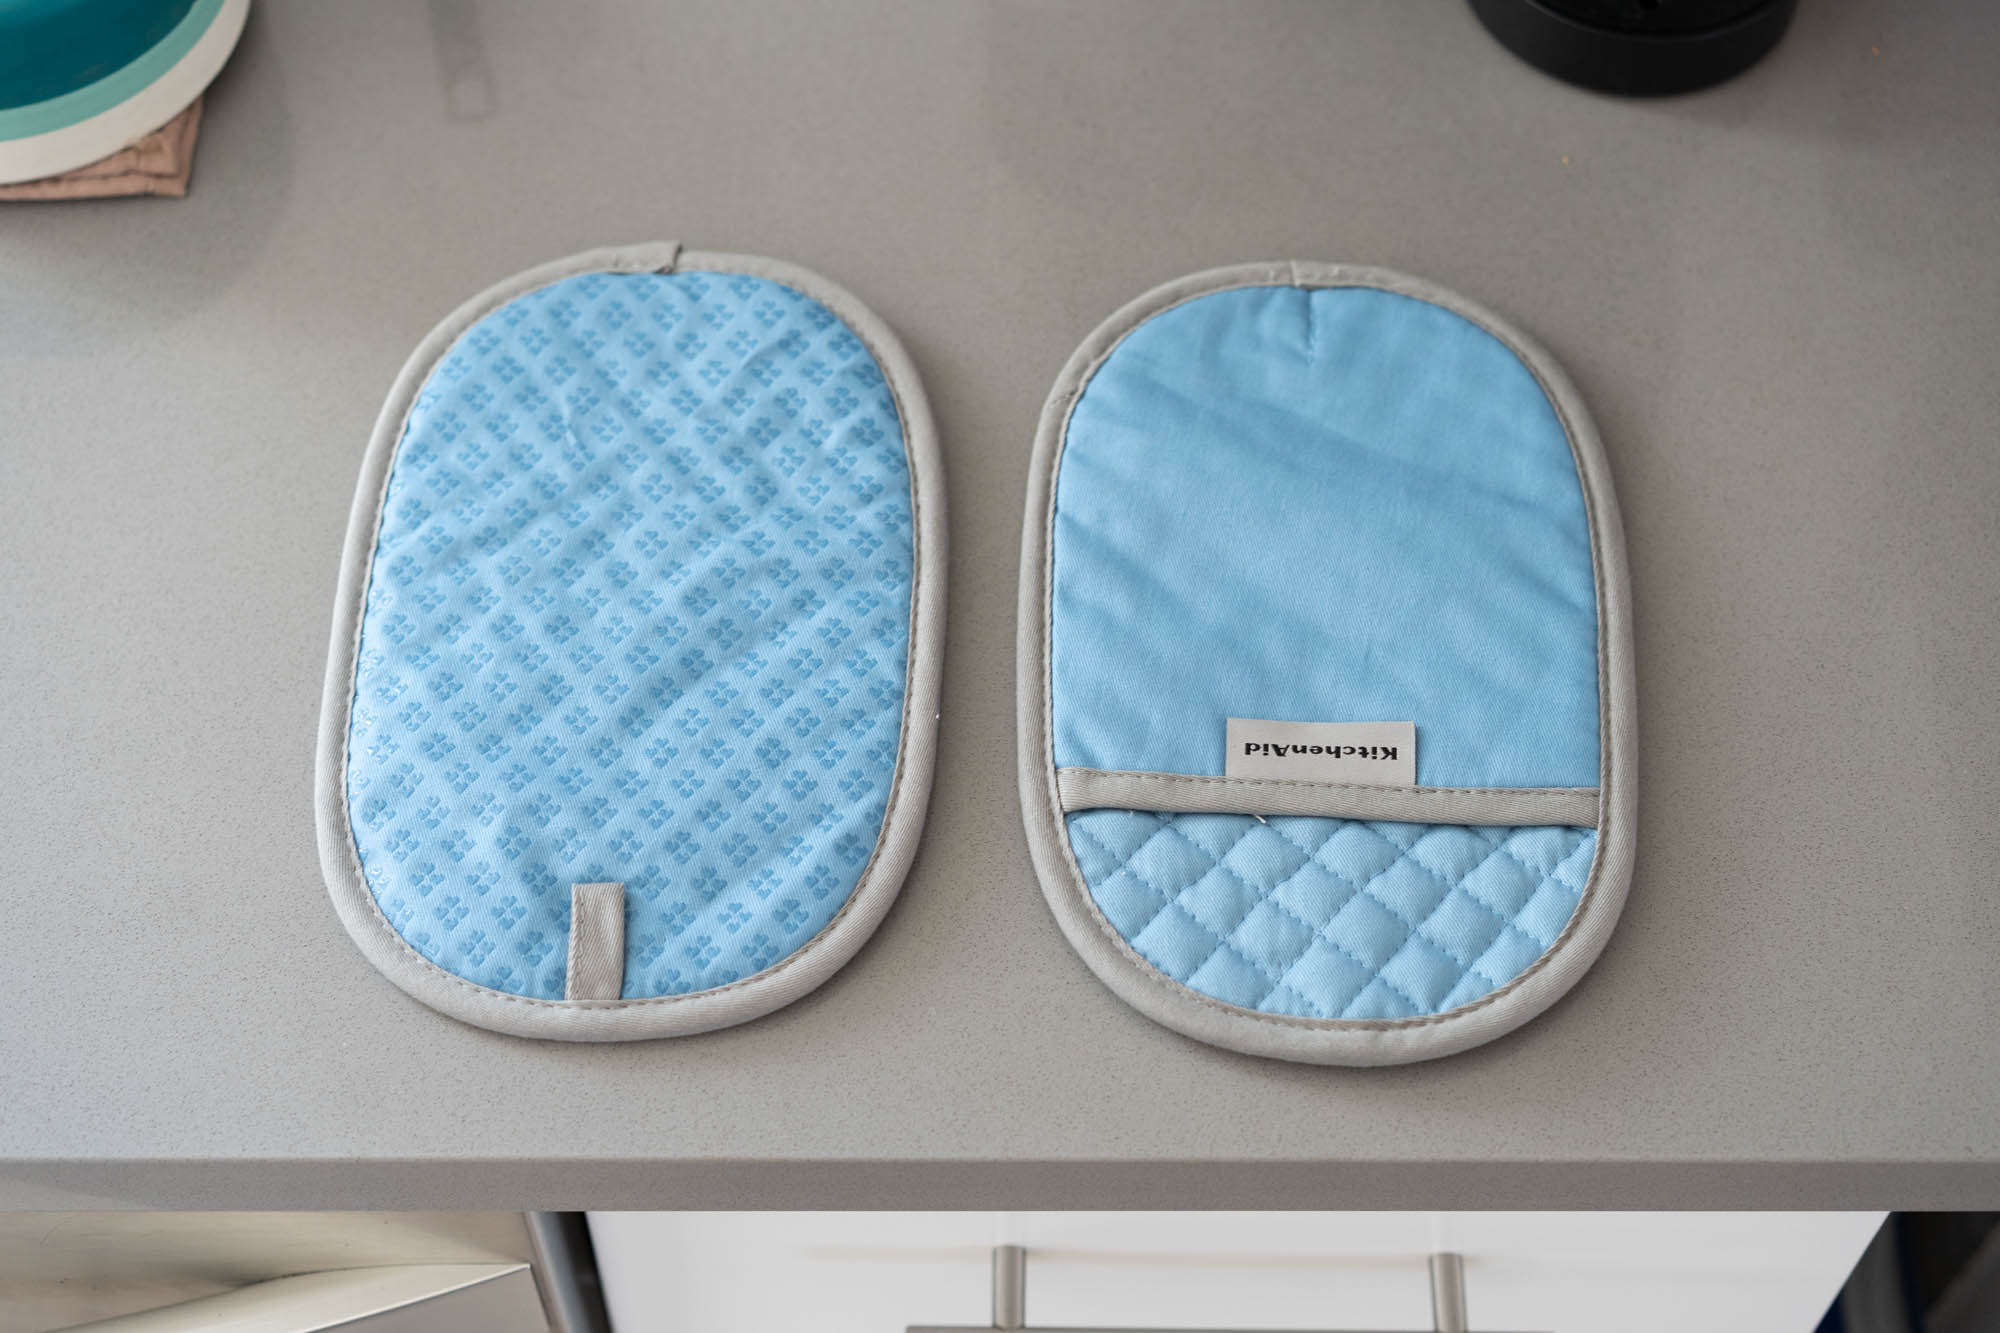 Pros & Cons of Silicone Mitt & Pot Holders, by HoppnShop